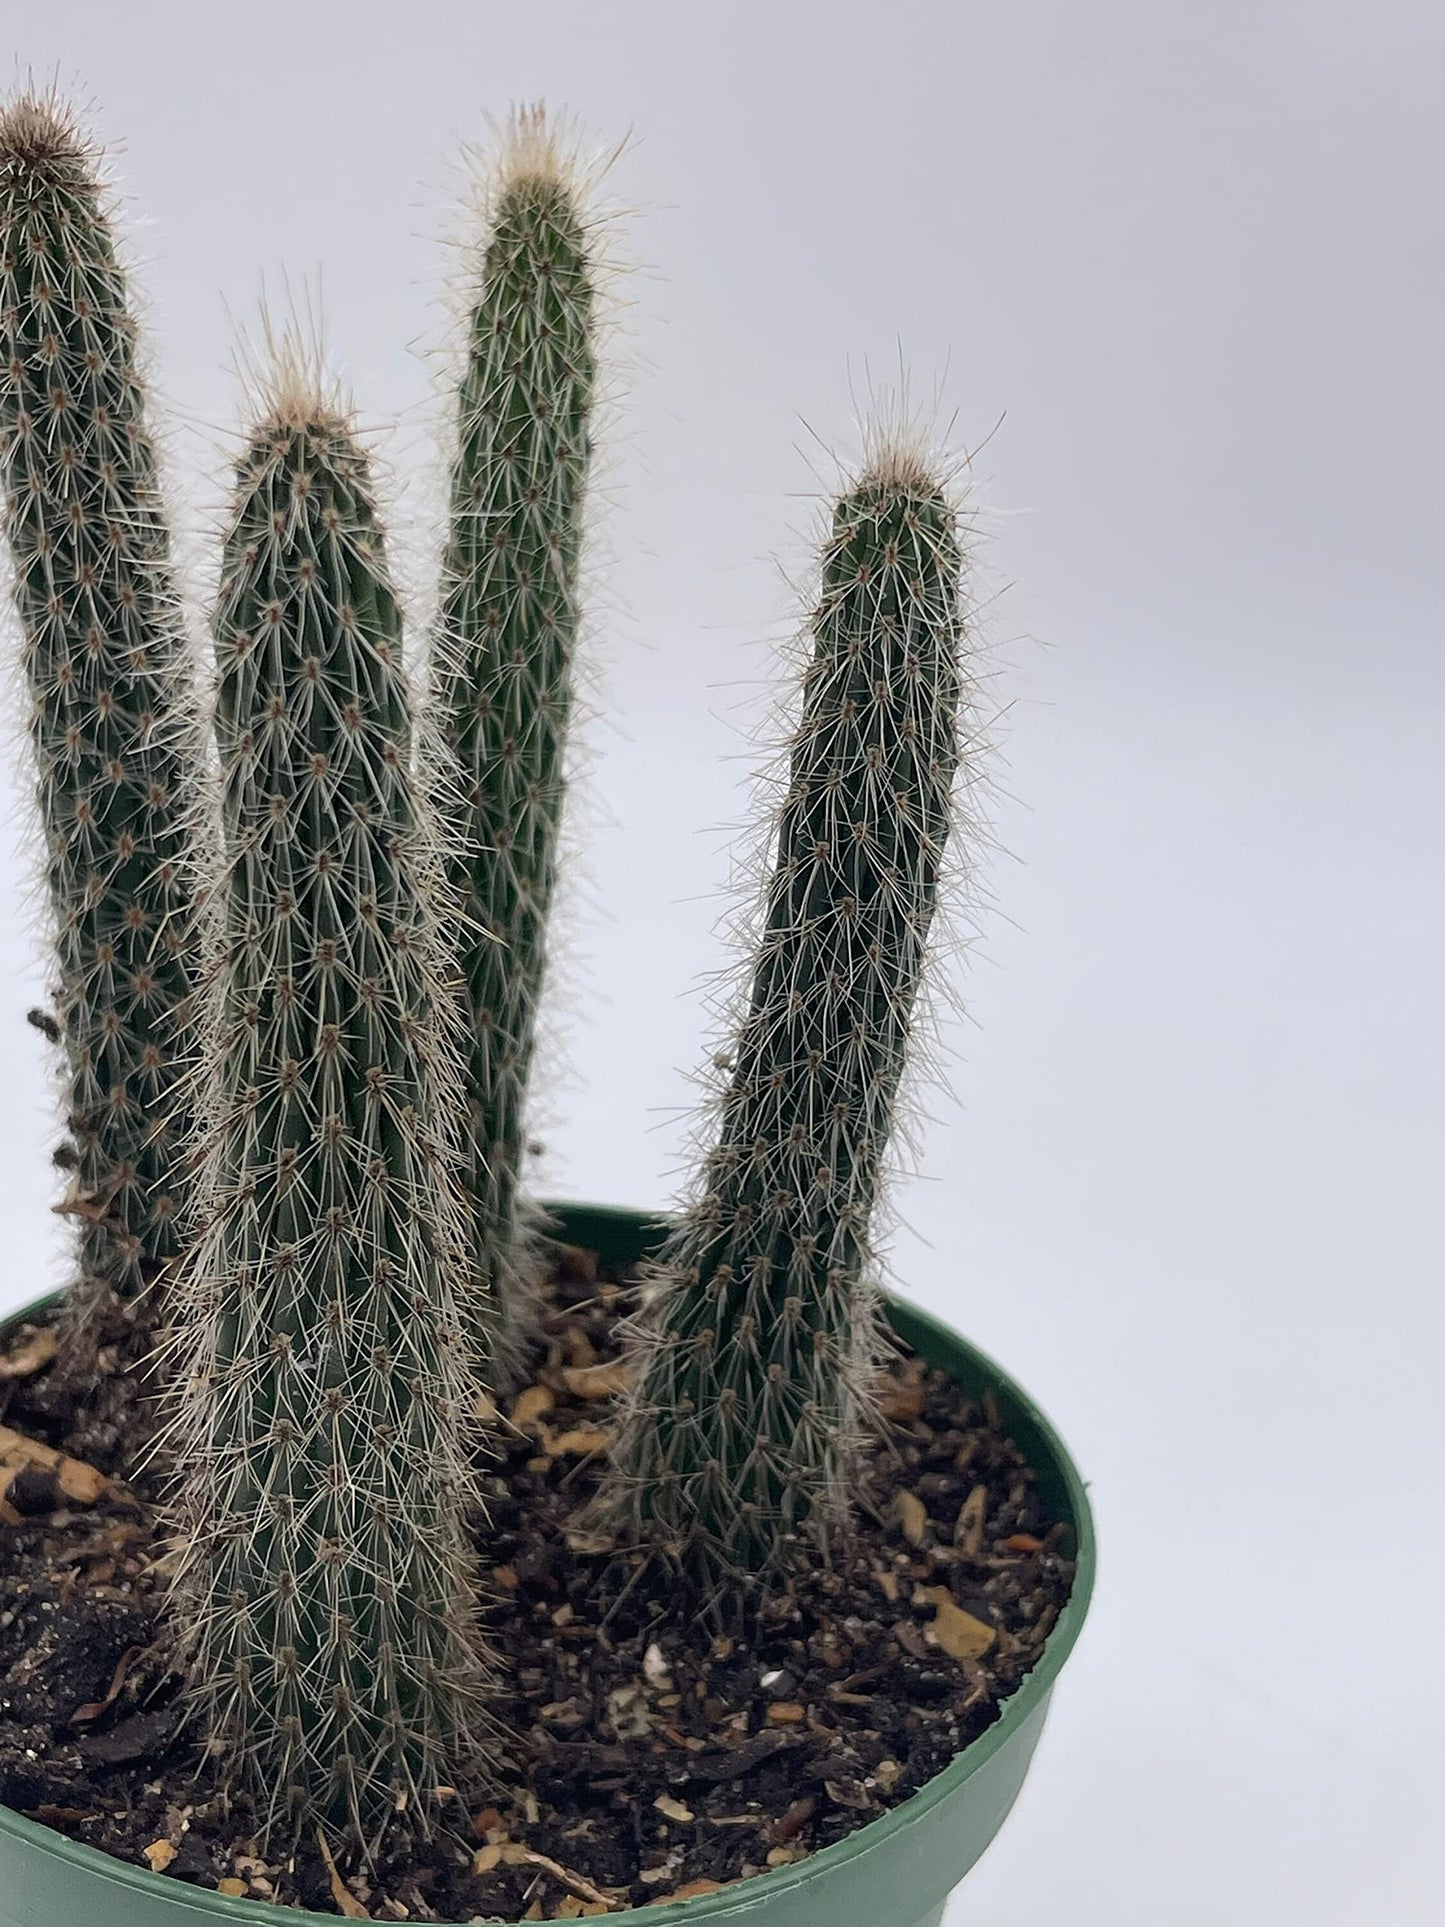 Old Man of The Andes, Oreocereus celsianus, Rare Cactus, 4 inch Pot, Well Rooted